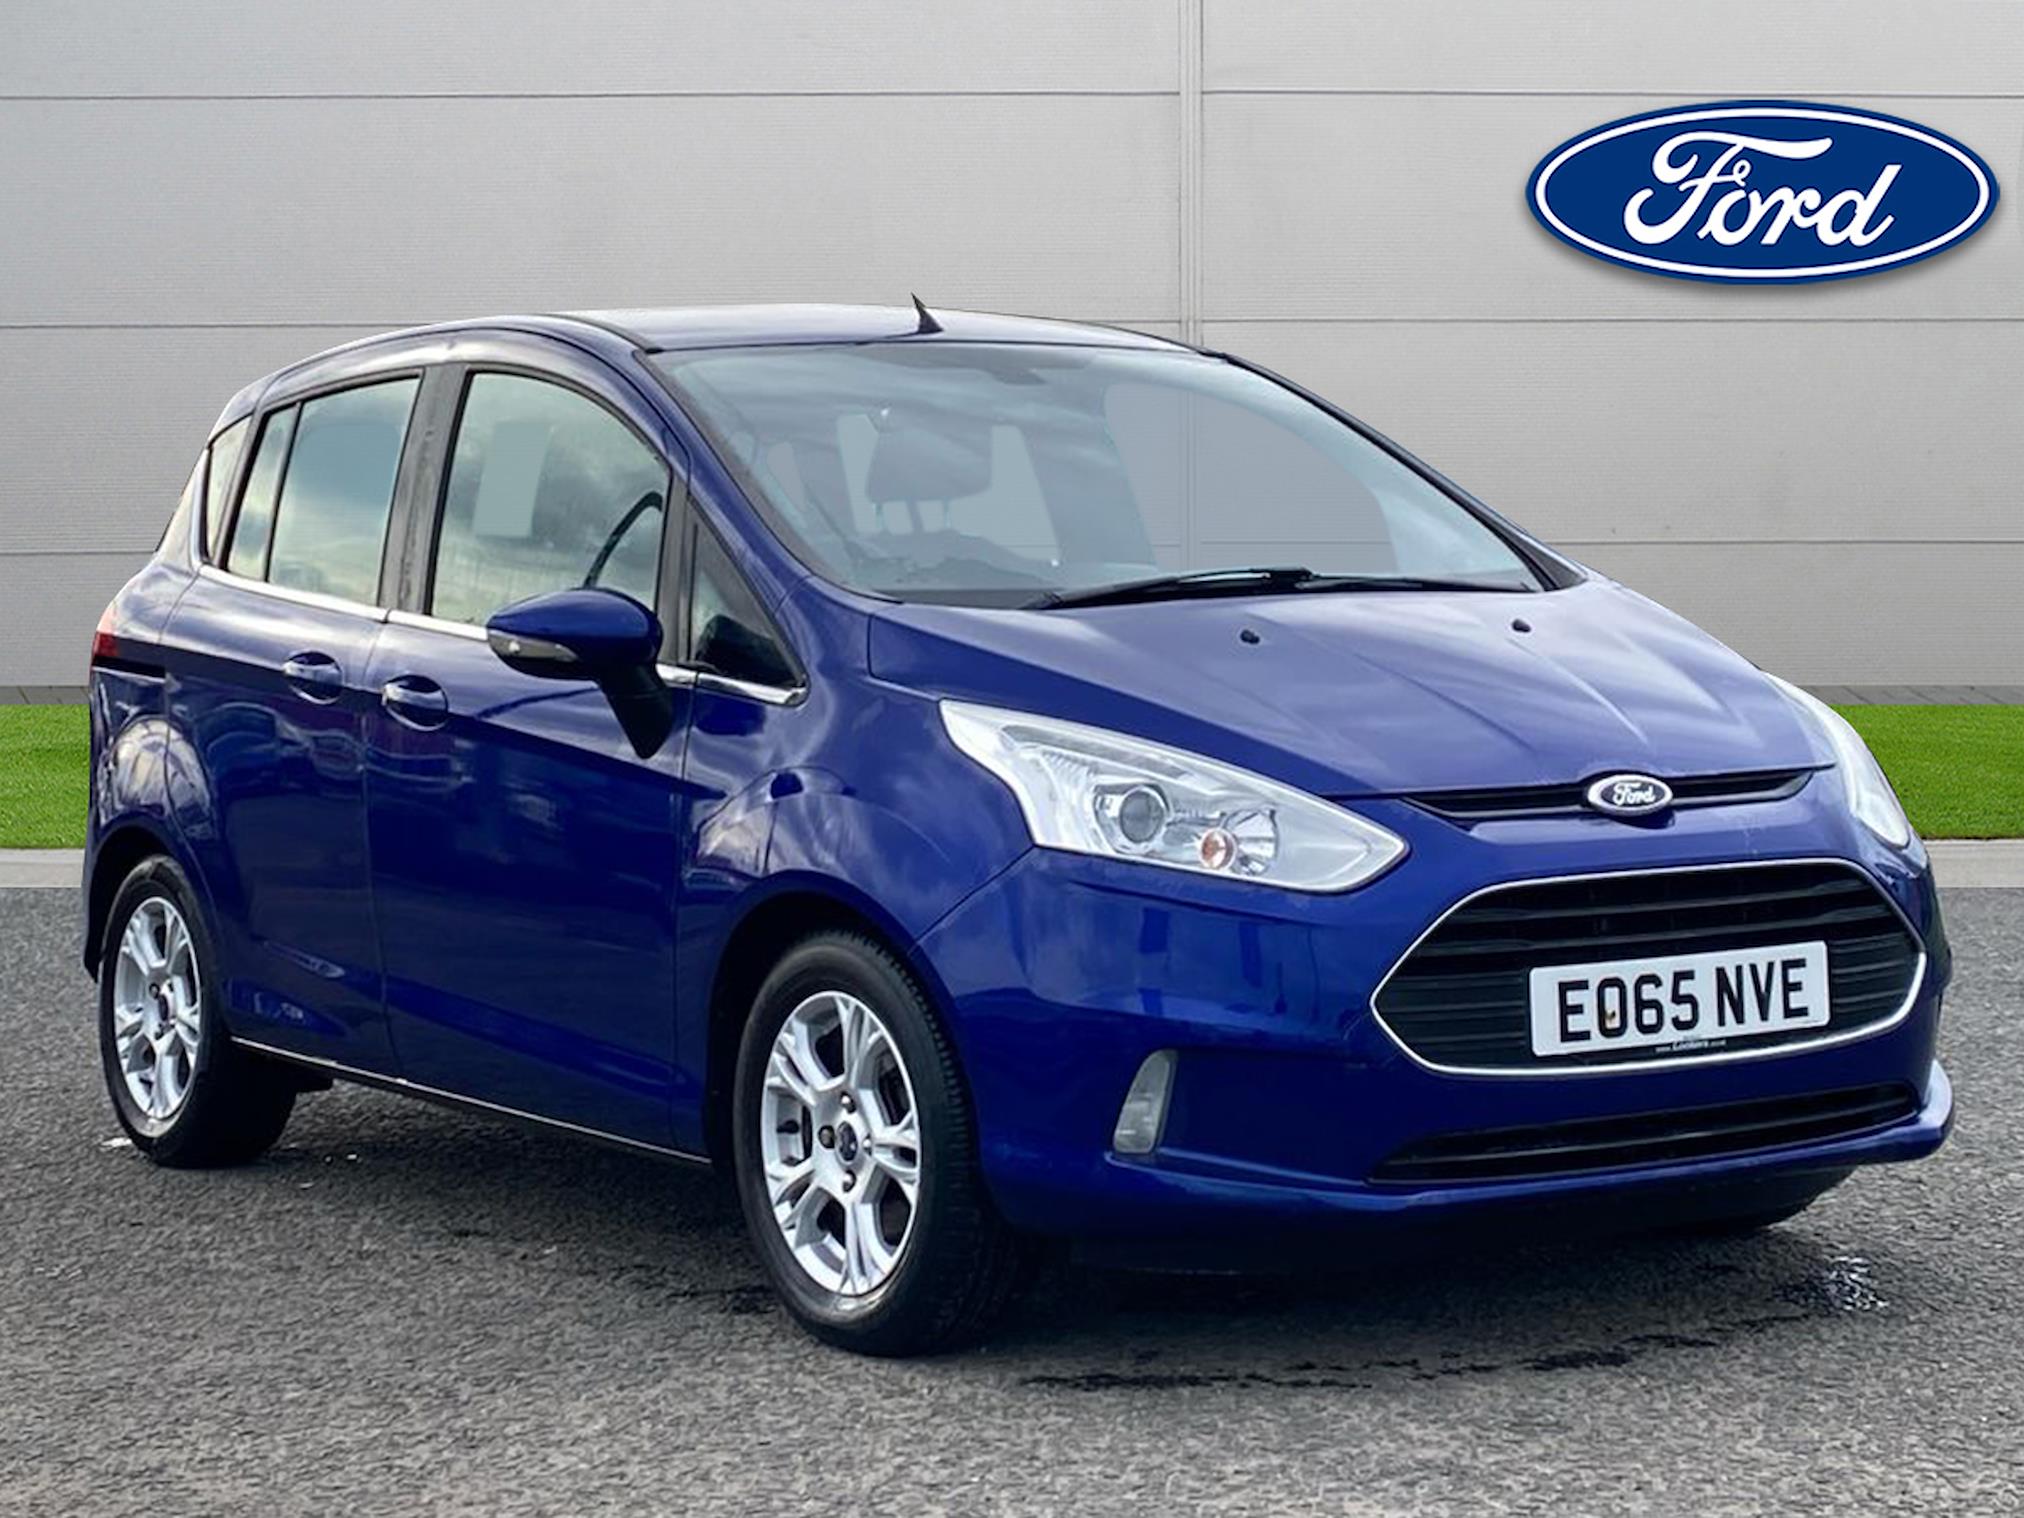 Used FORD B-MAX 1.4 Zetec 5Dr 2015